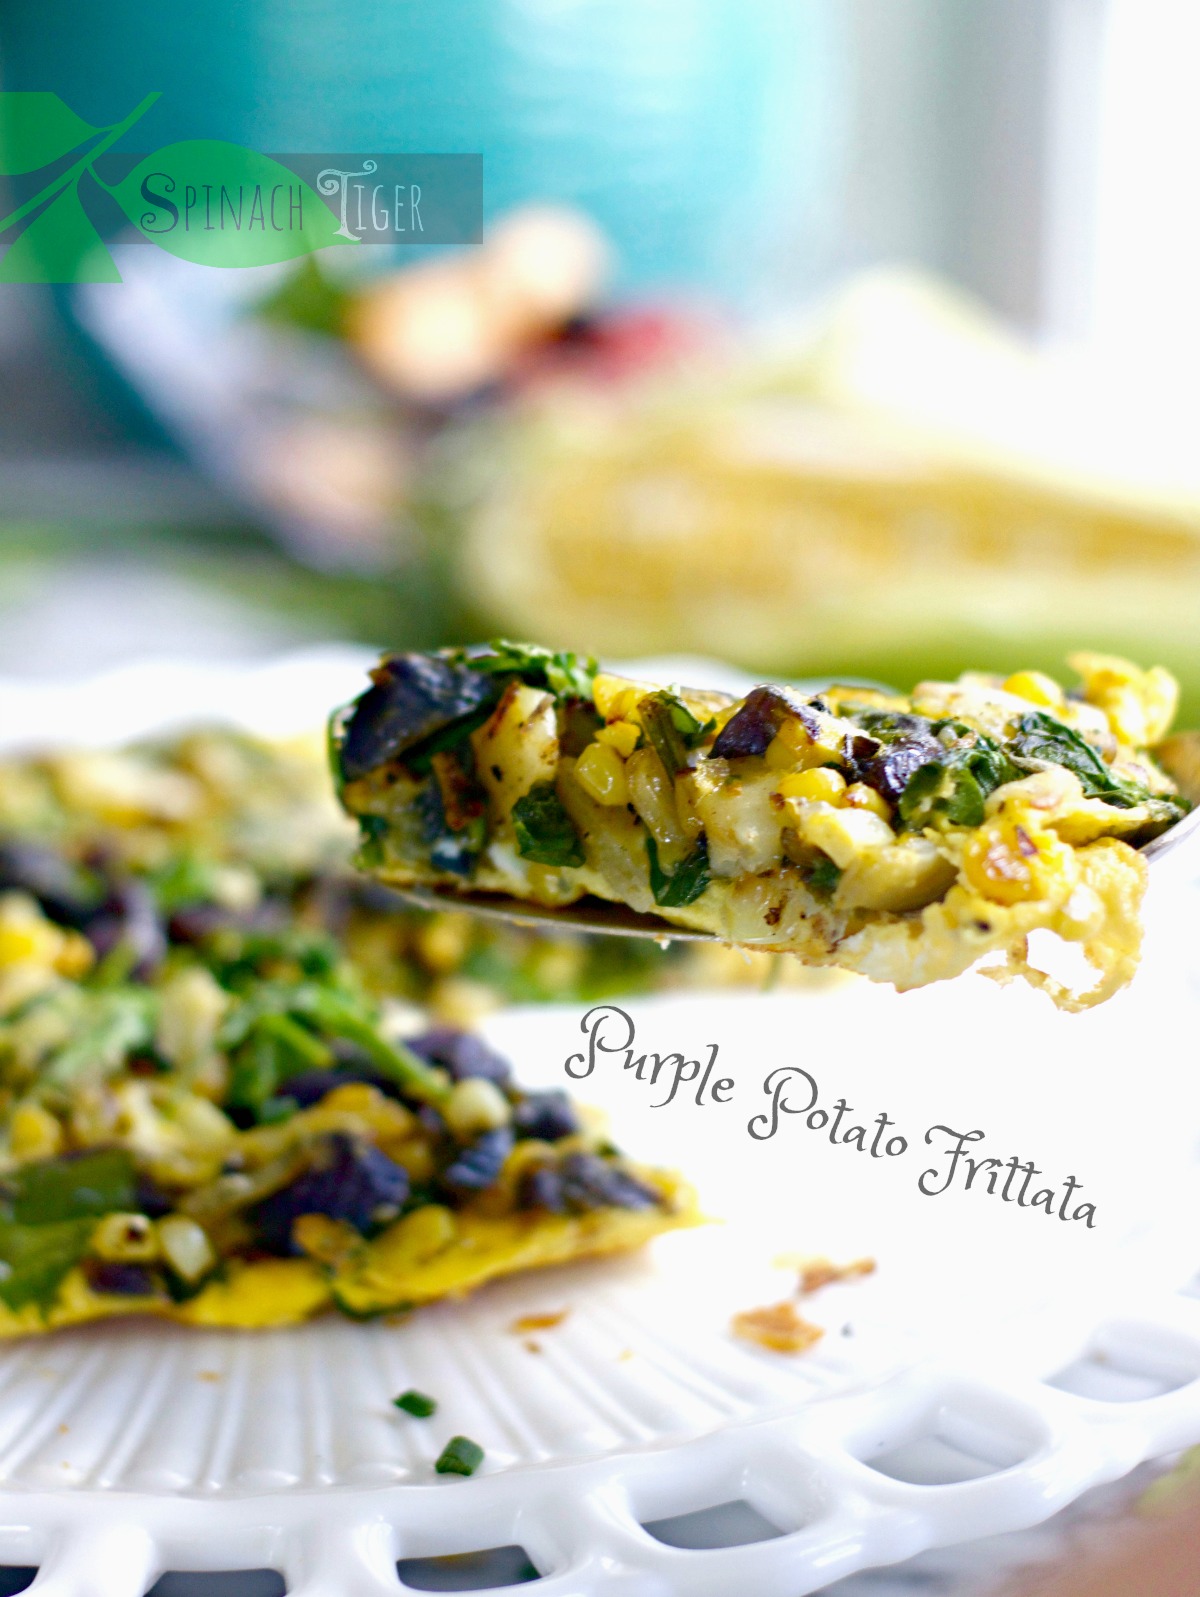 Healthy Frittata with Purple Potatoes From Spinach Tiger